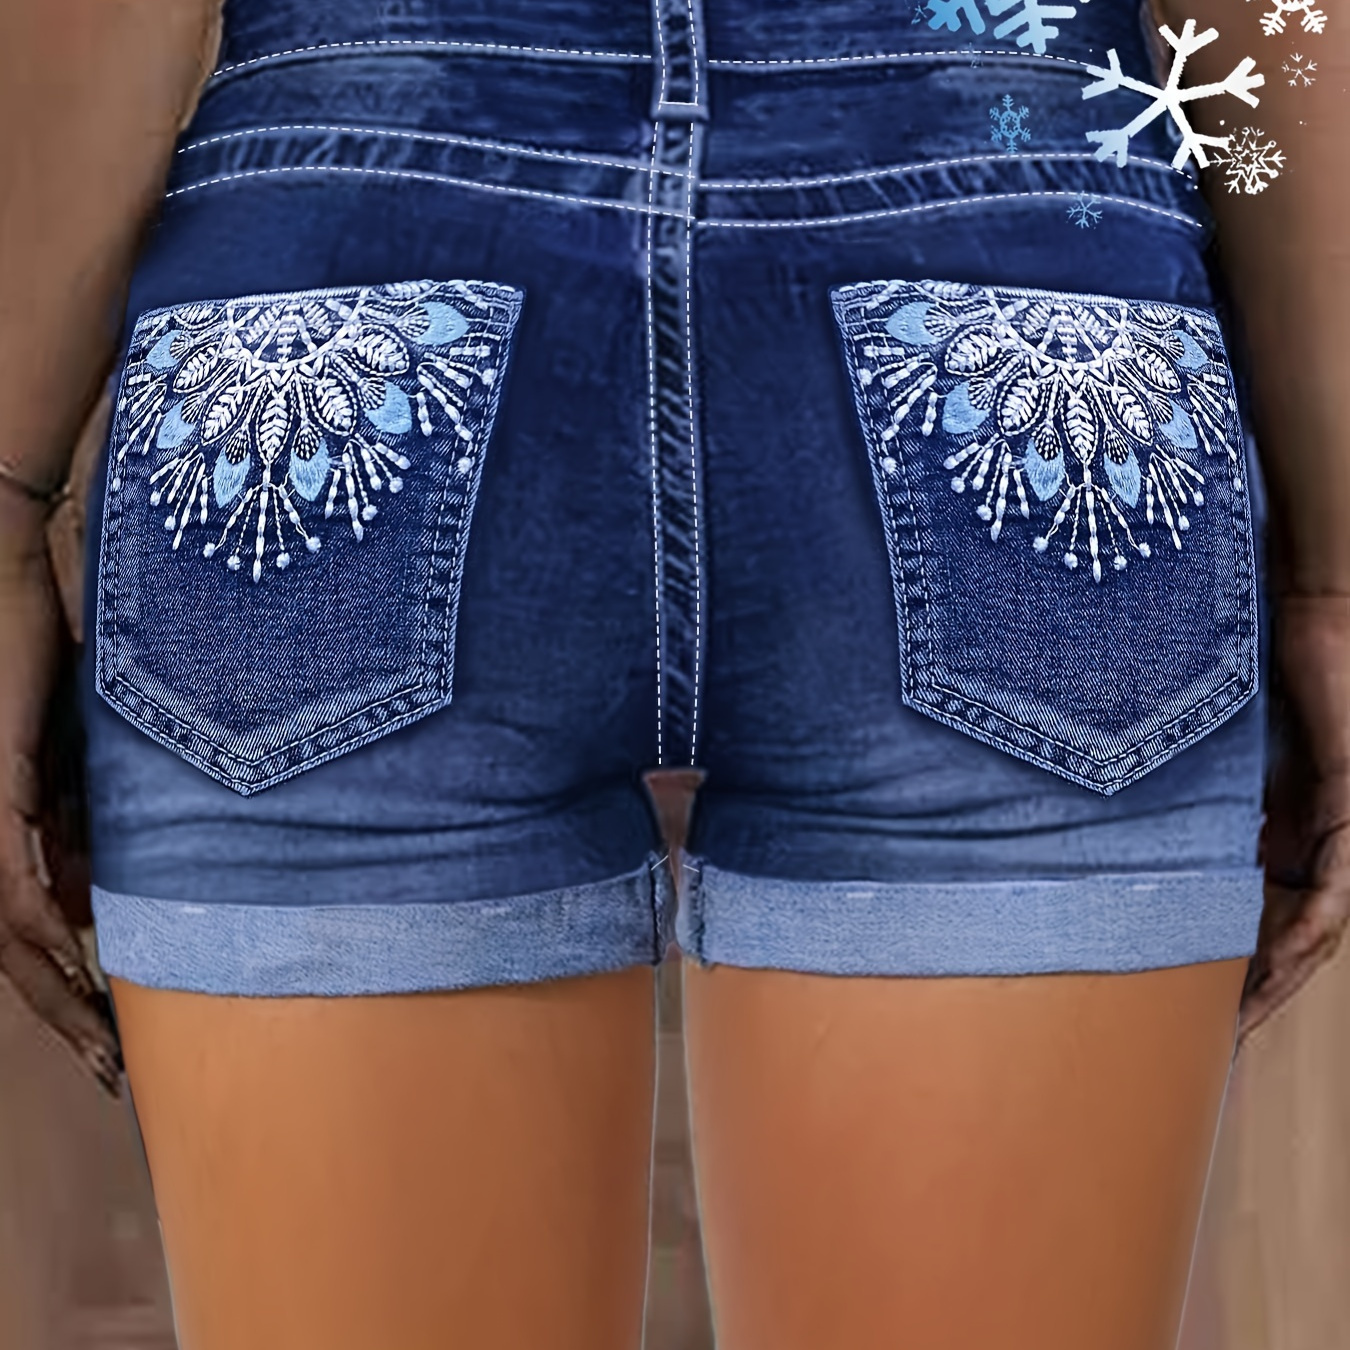 

Women's High Waist Stretchy Denim Shorts, Blue Slim Fit With Rolled Cuff And Embroidery, Summer Vintage Style Jean Shorts